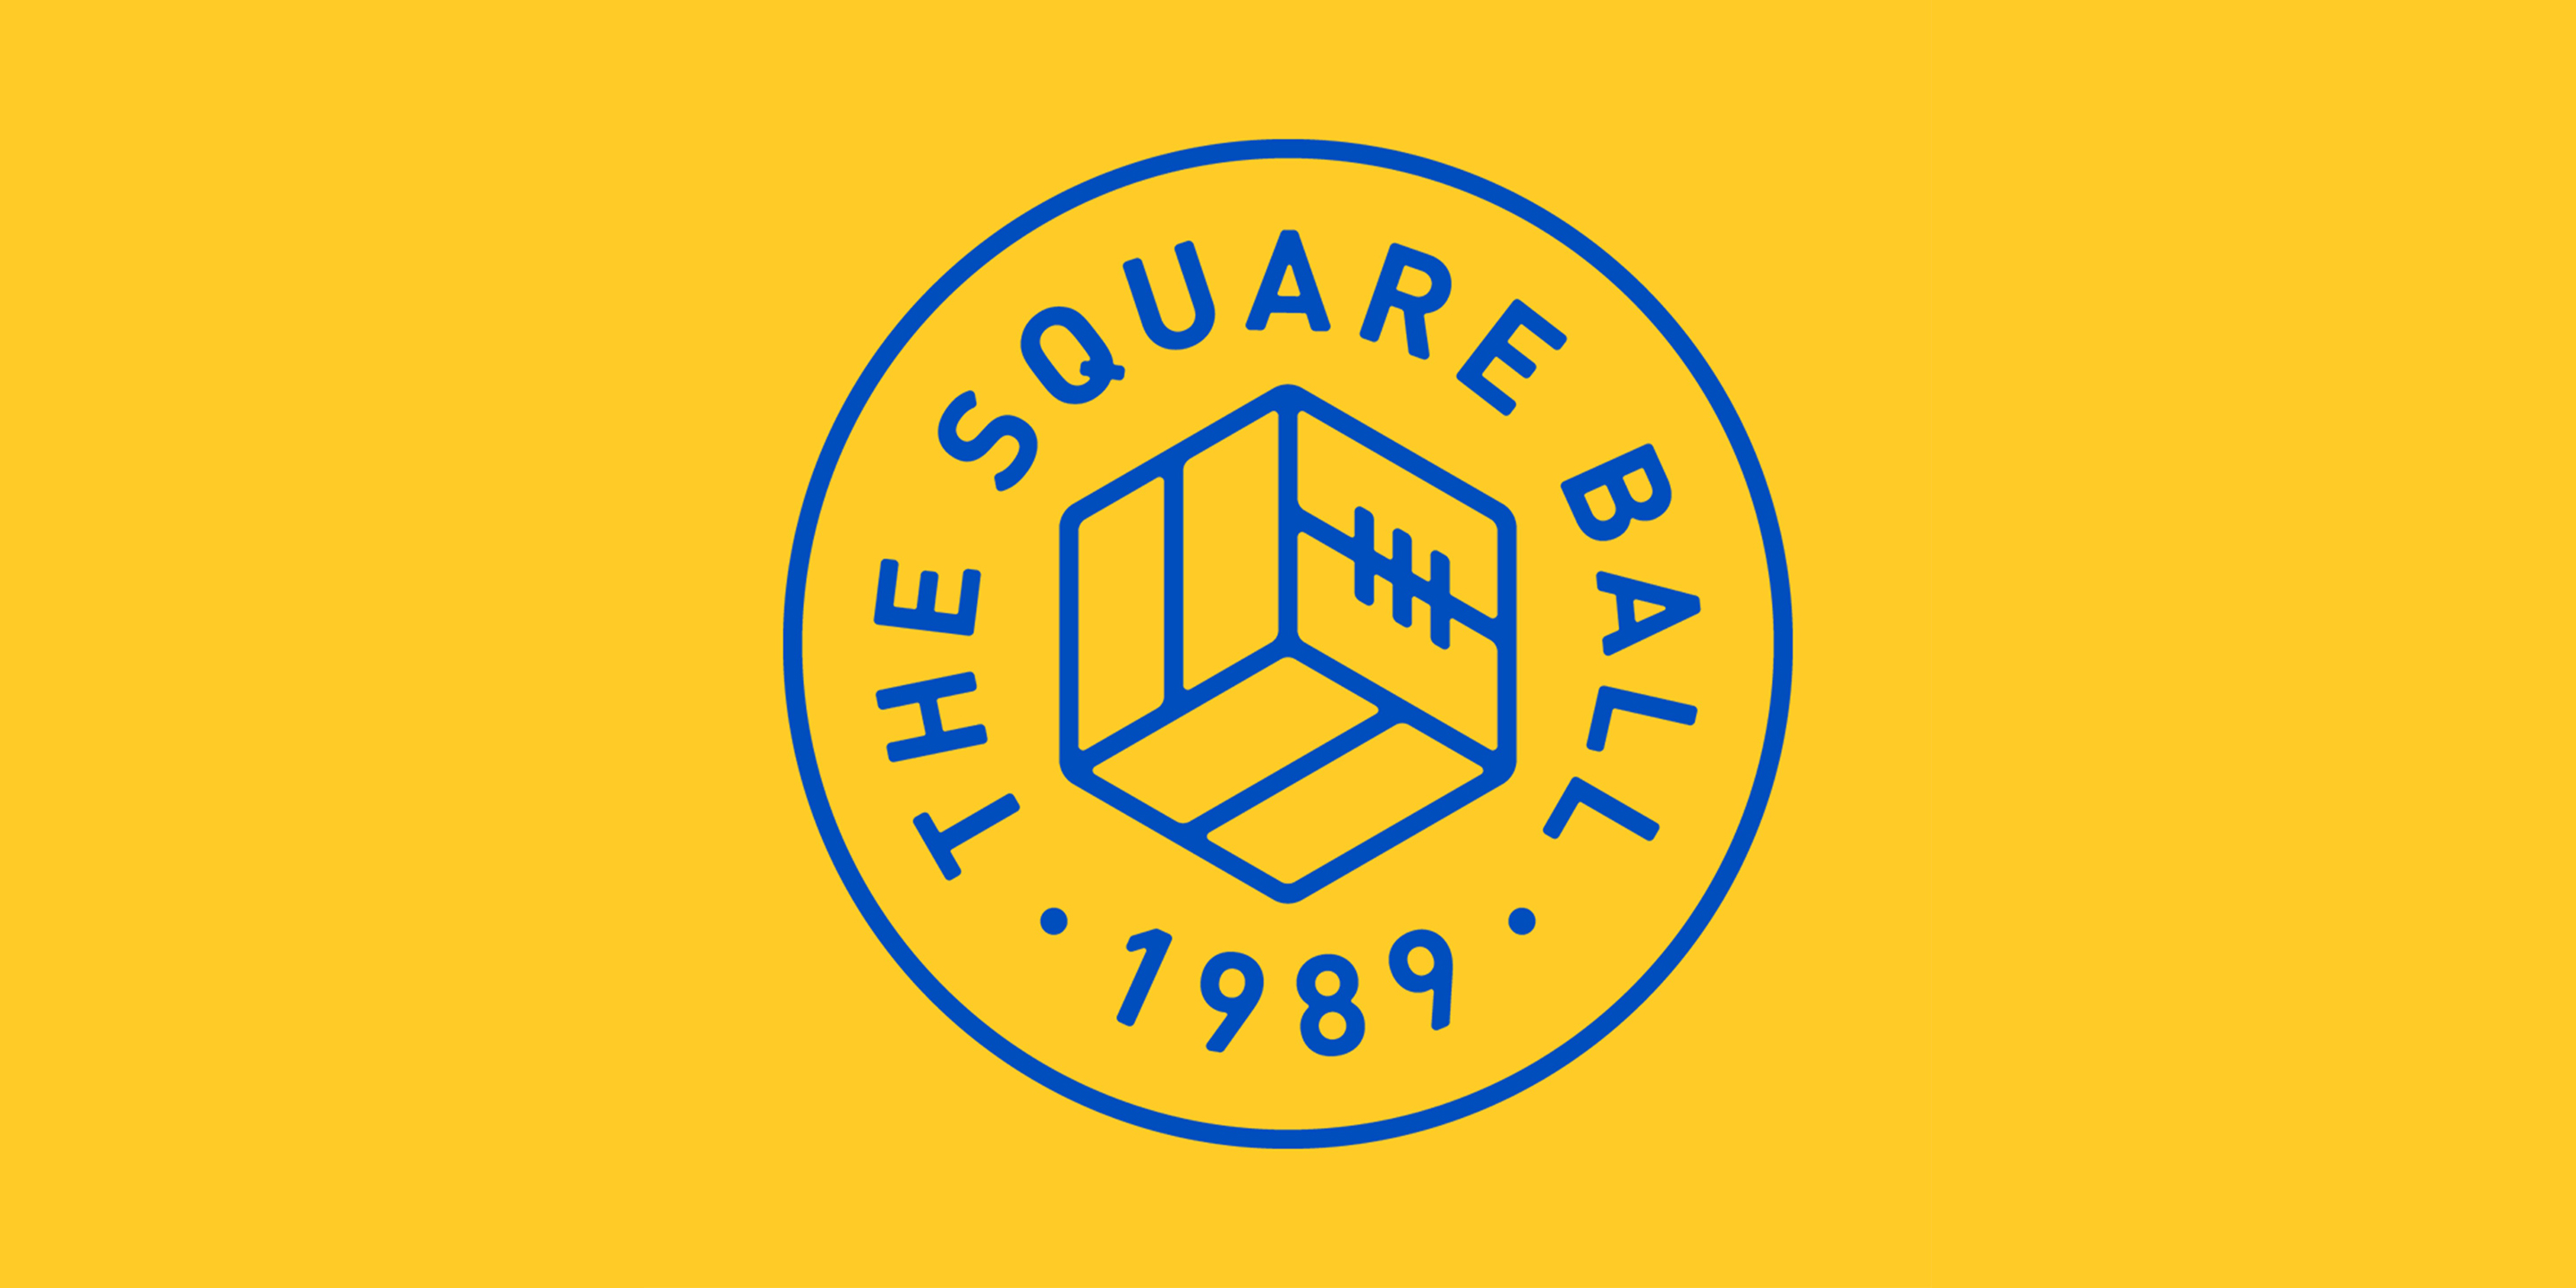 The Square Ball logo, in blue on yellow.